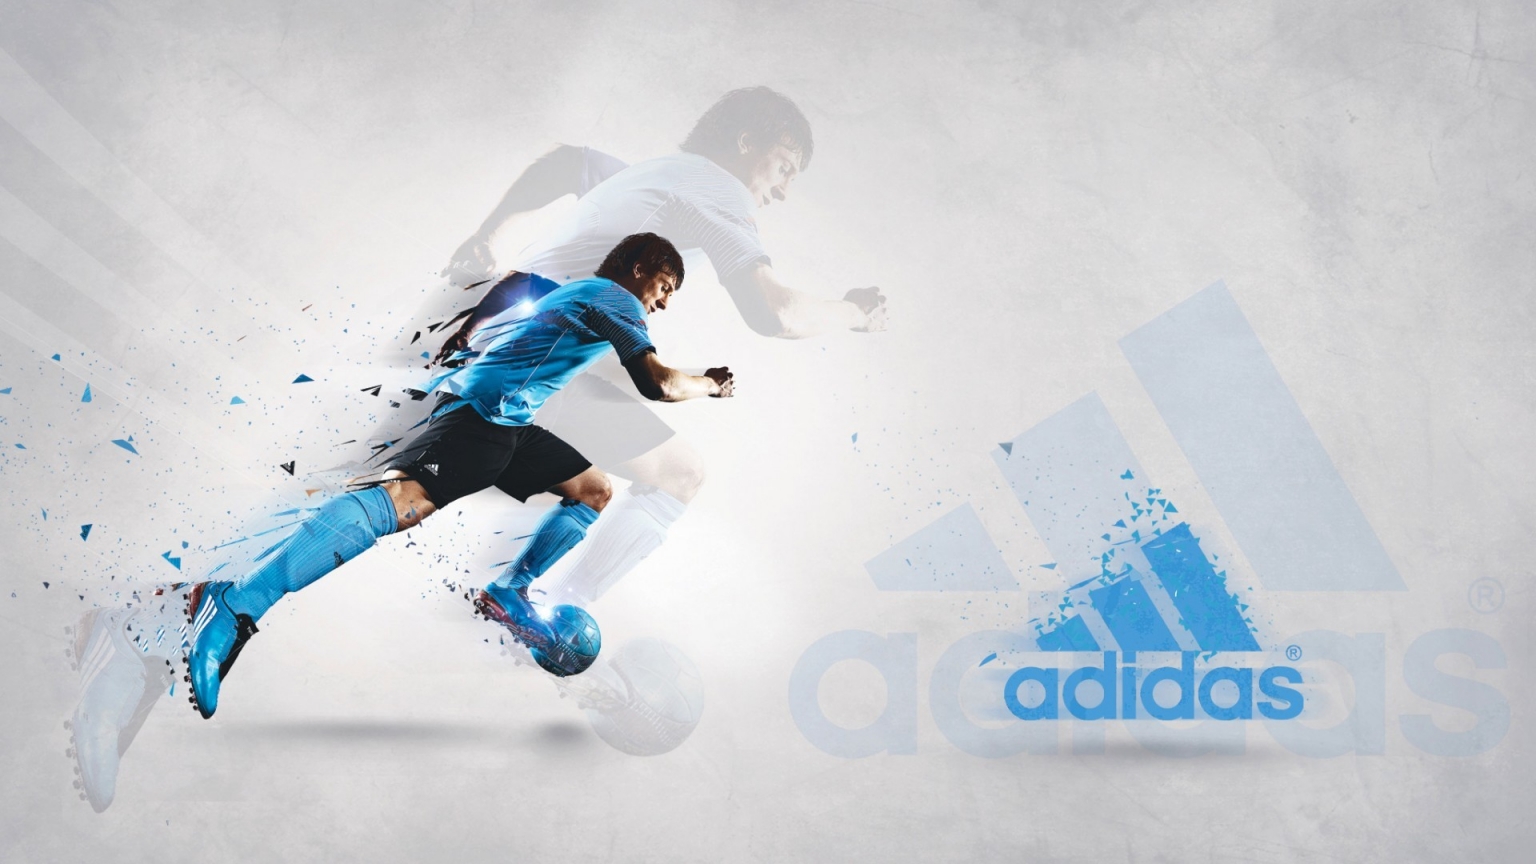 Adidas Poster for 1536 x 864 HDTV resolution